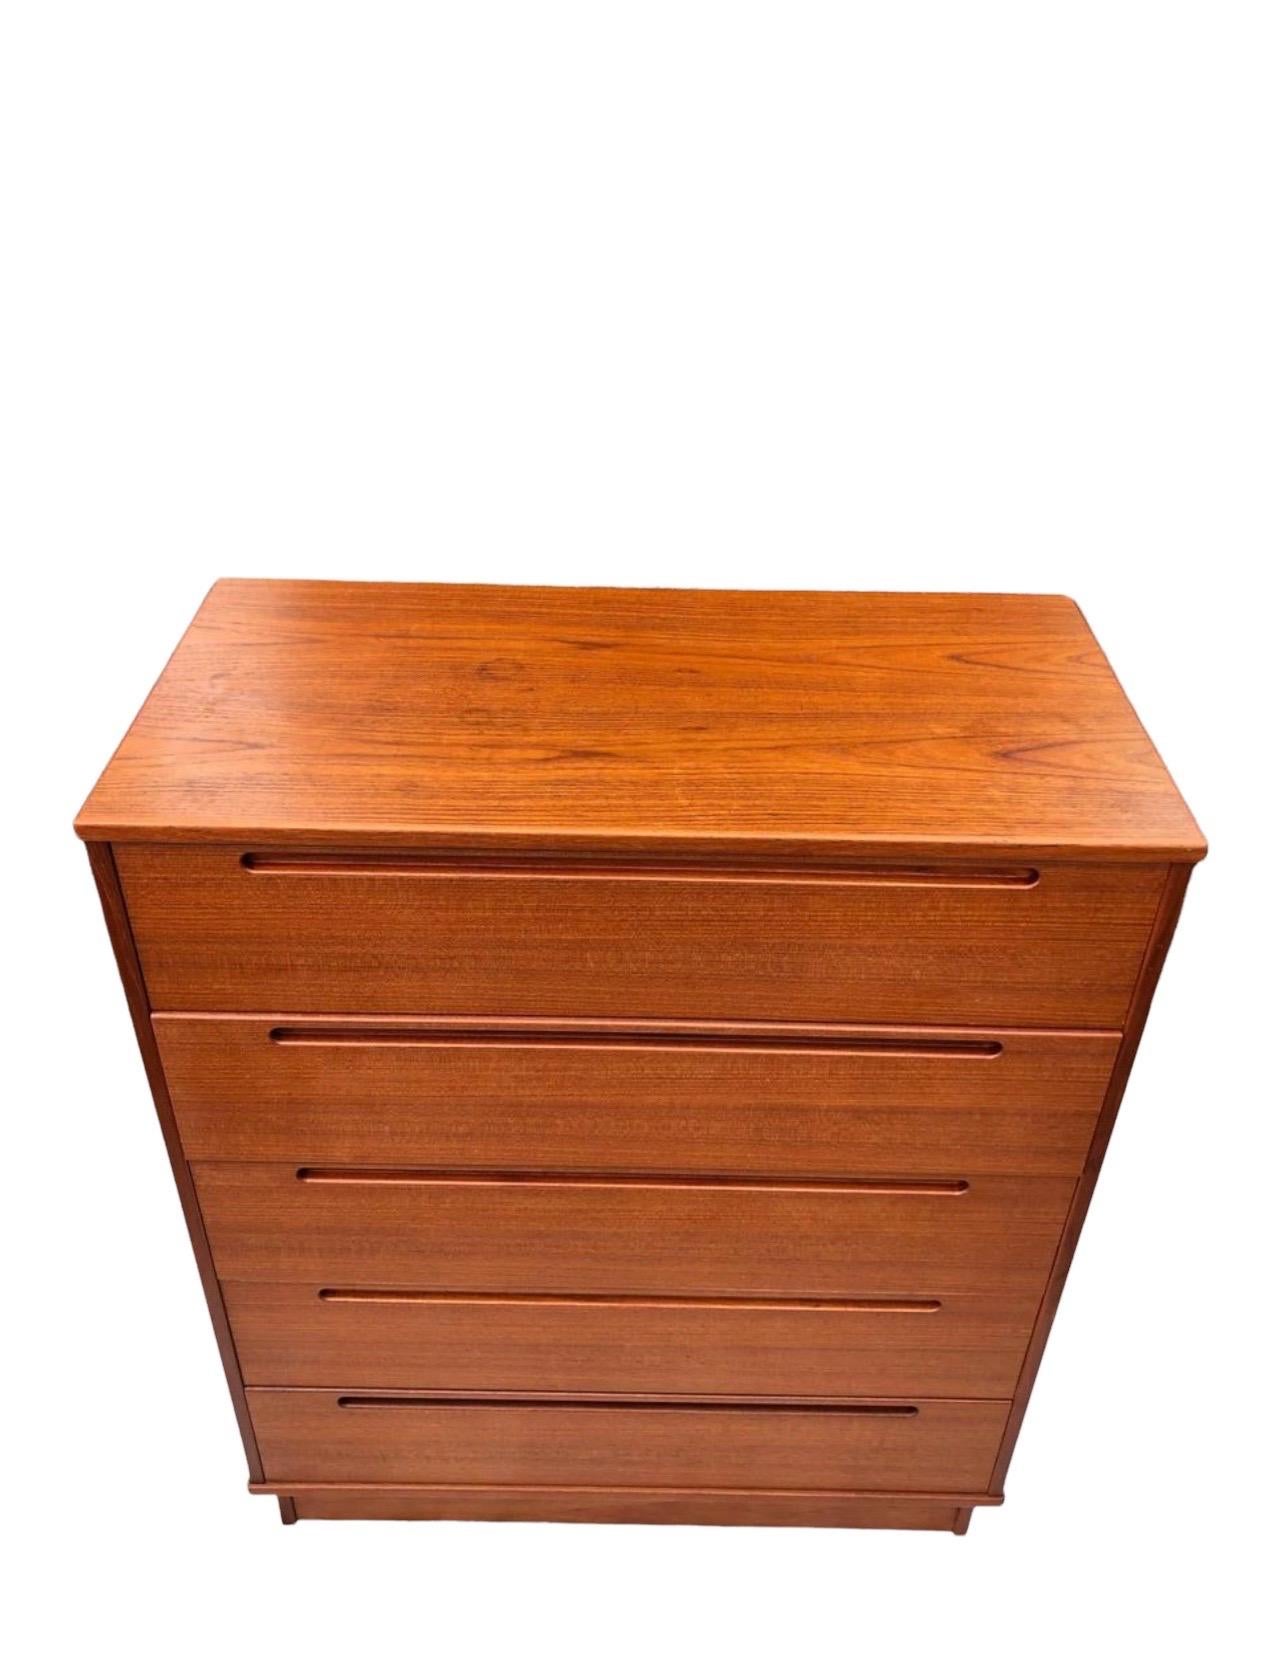 Sturdy and well built 5-drawer dresser by Tørring Møbelfabrik. All drawers glide well.